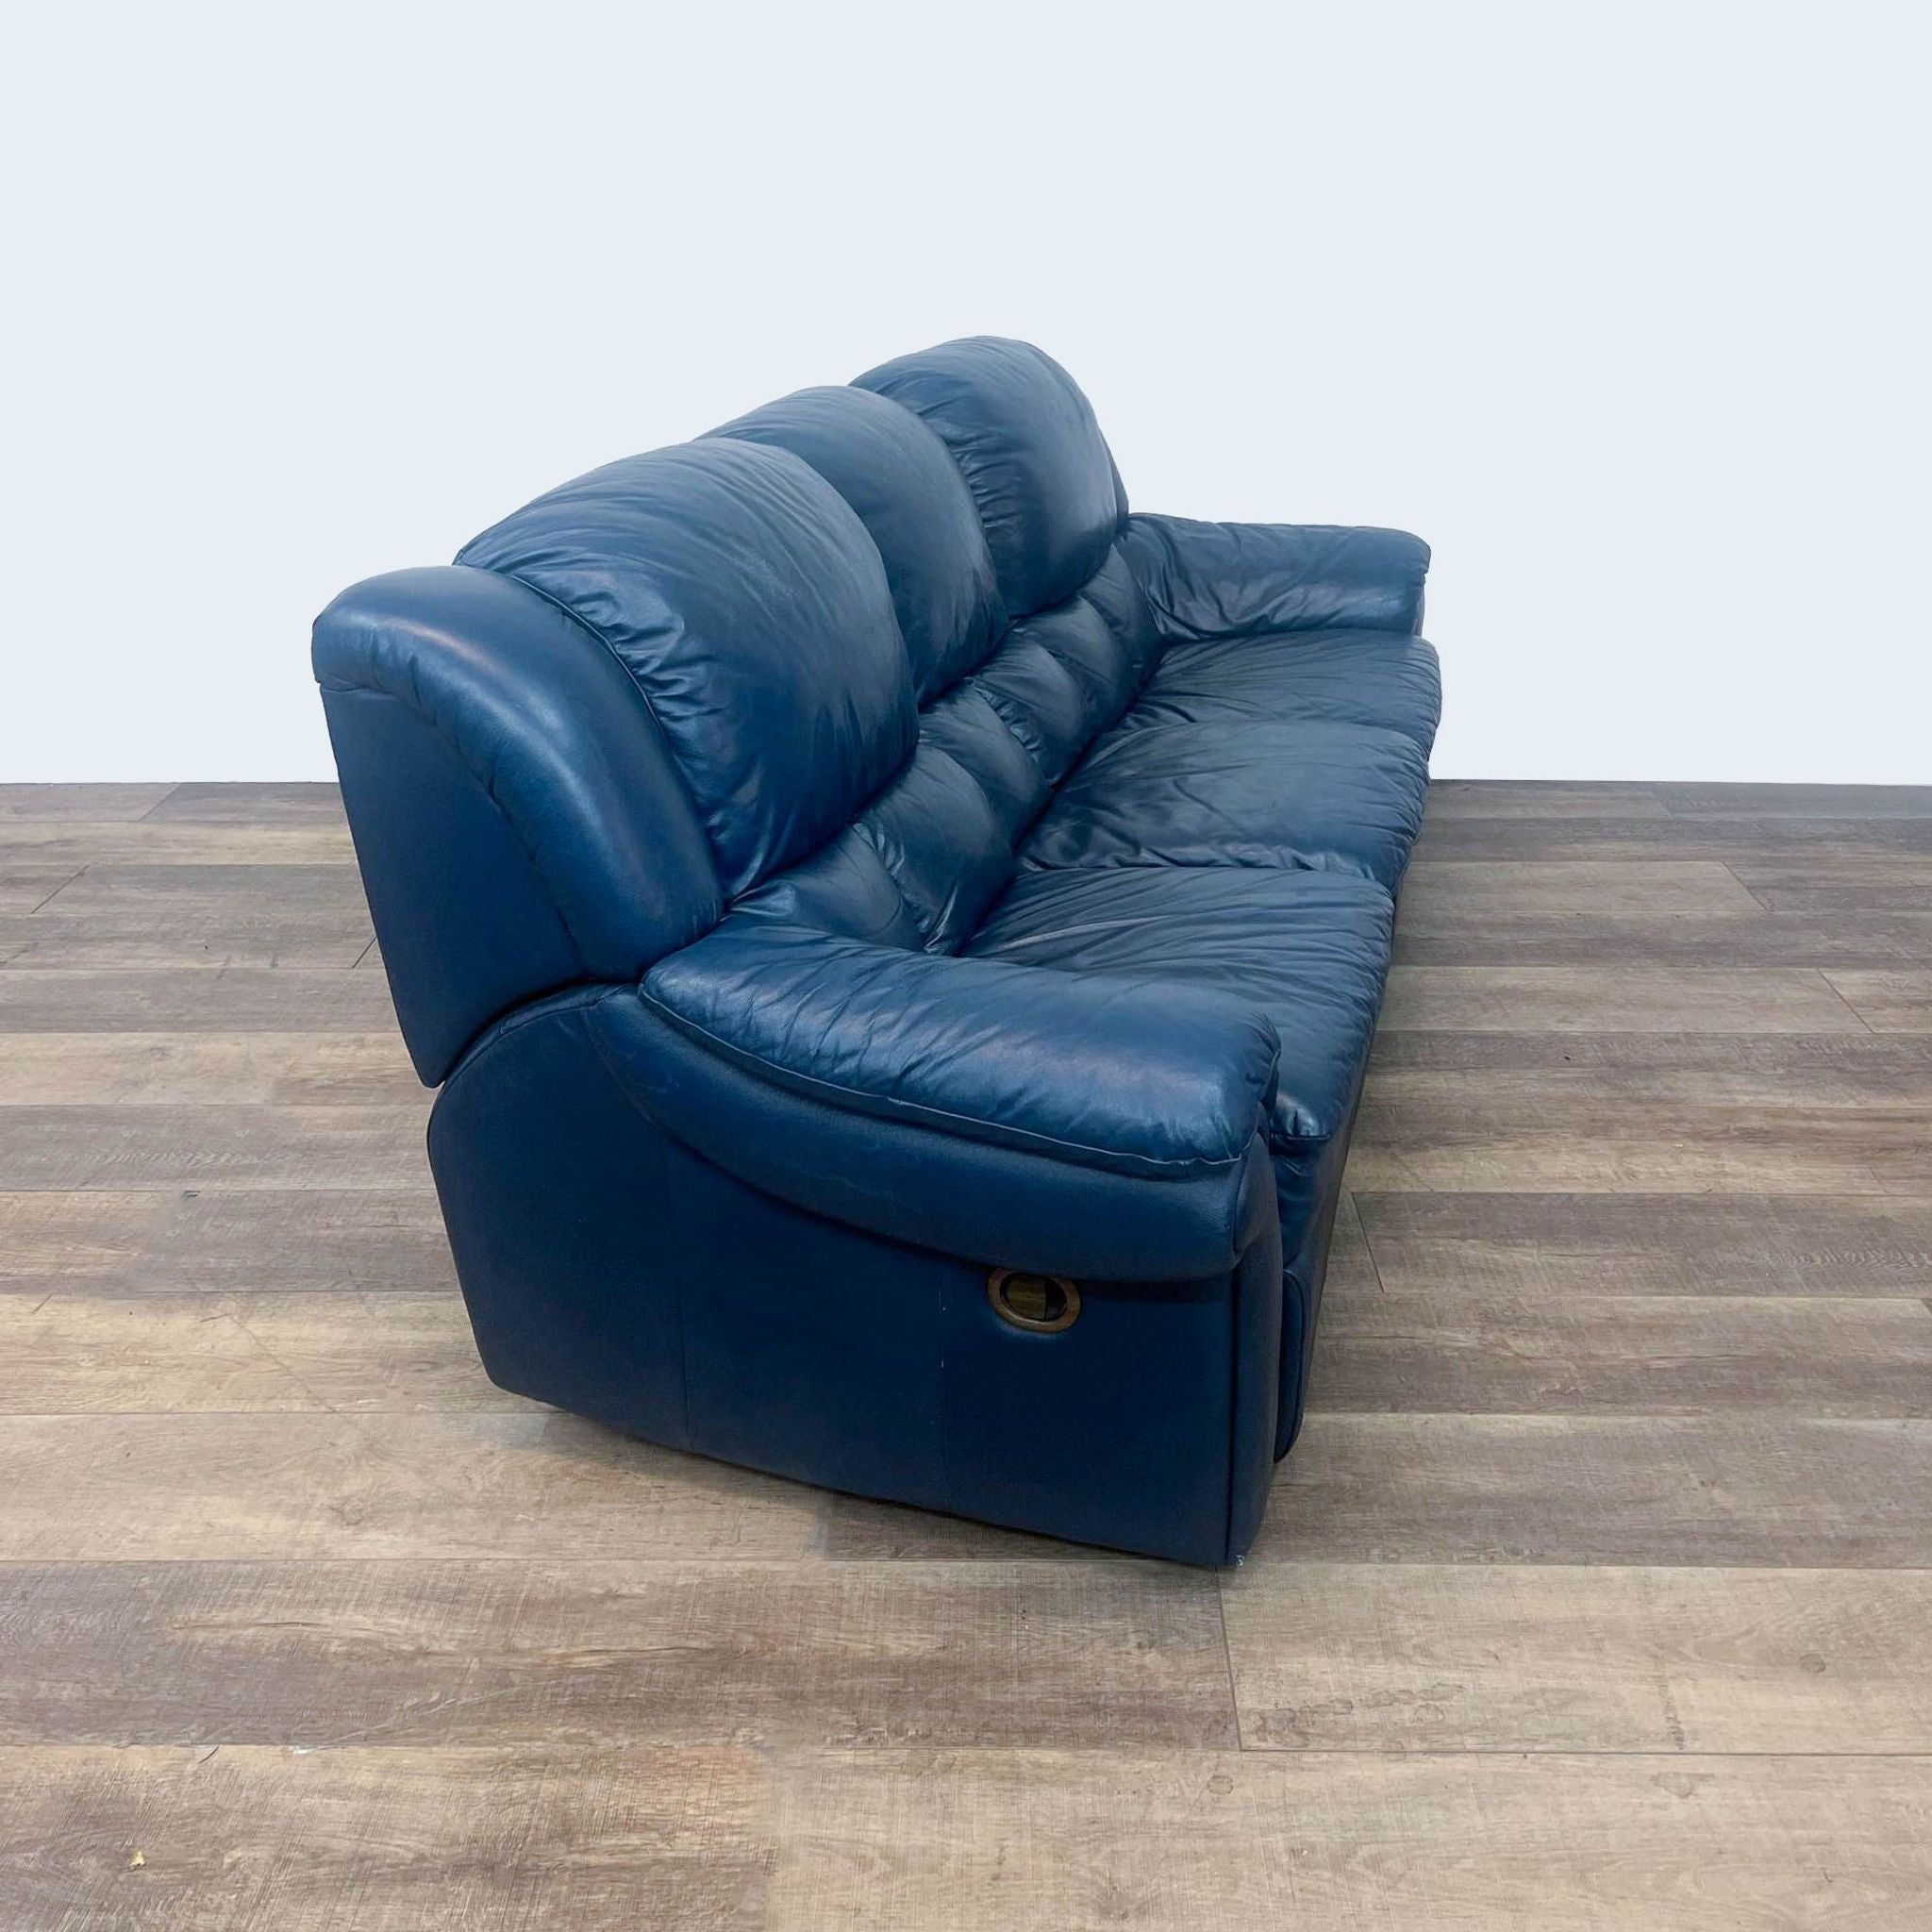 Alt: Dark blue Reperch 94" leather reclining sofa with high back and pillow-top arms on wood floor.